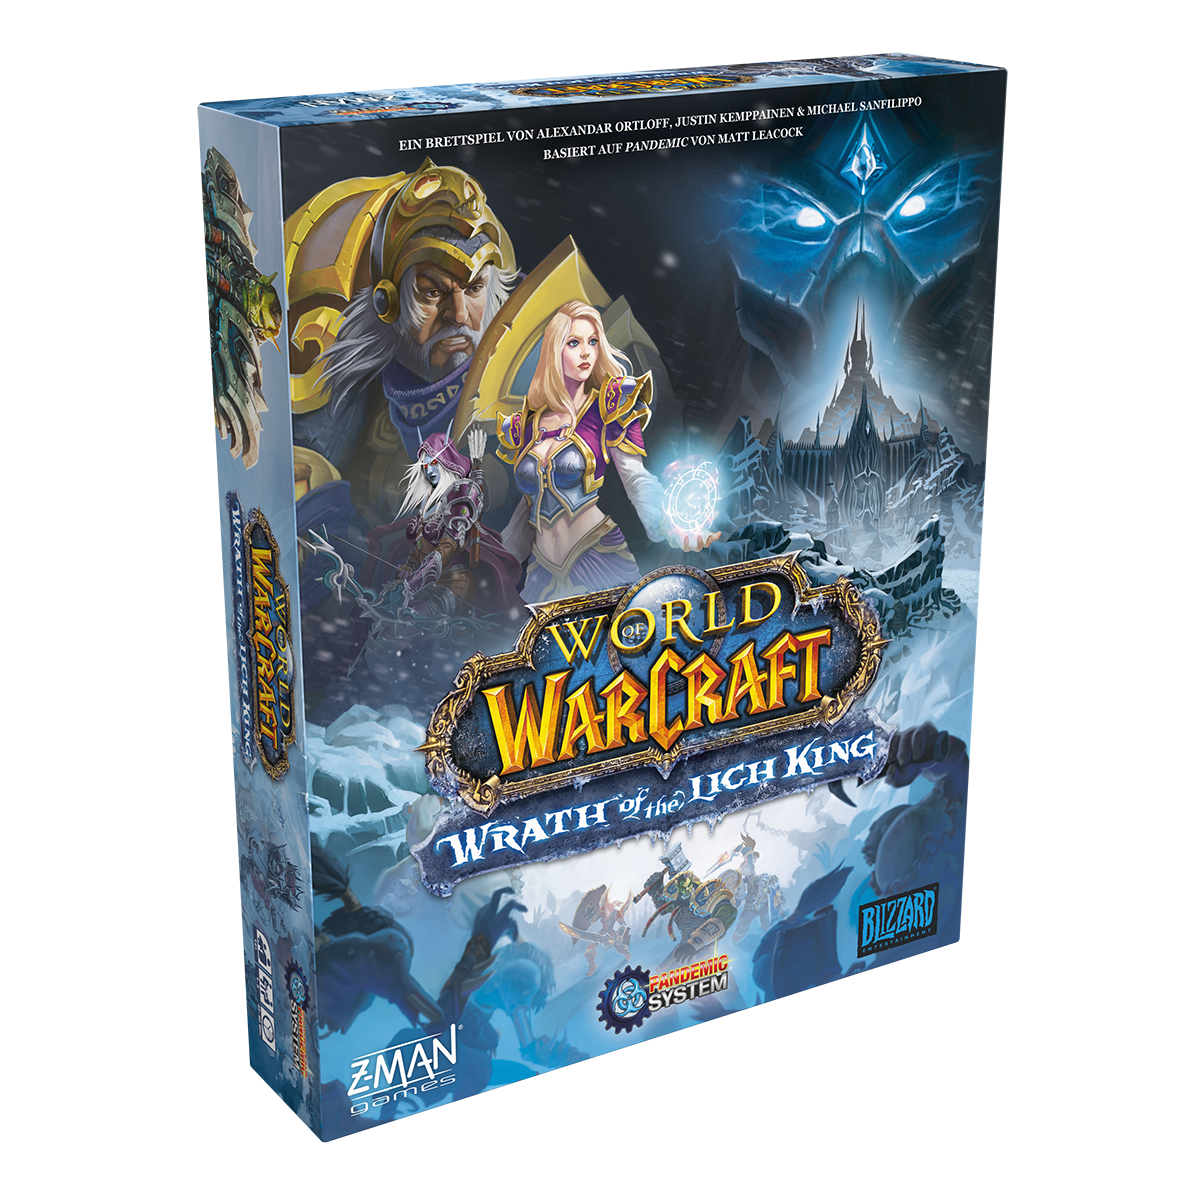 World of Warcraft: Wrath of the Lichking | Pandemic